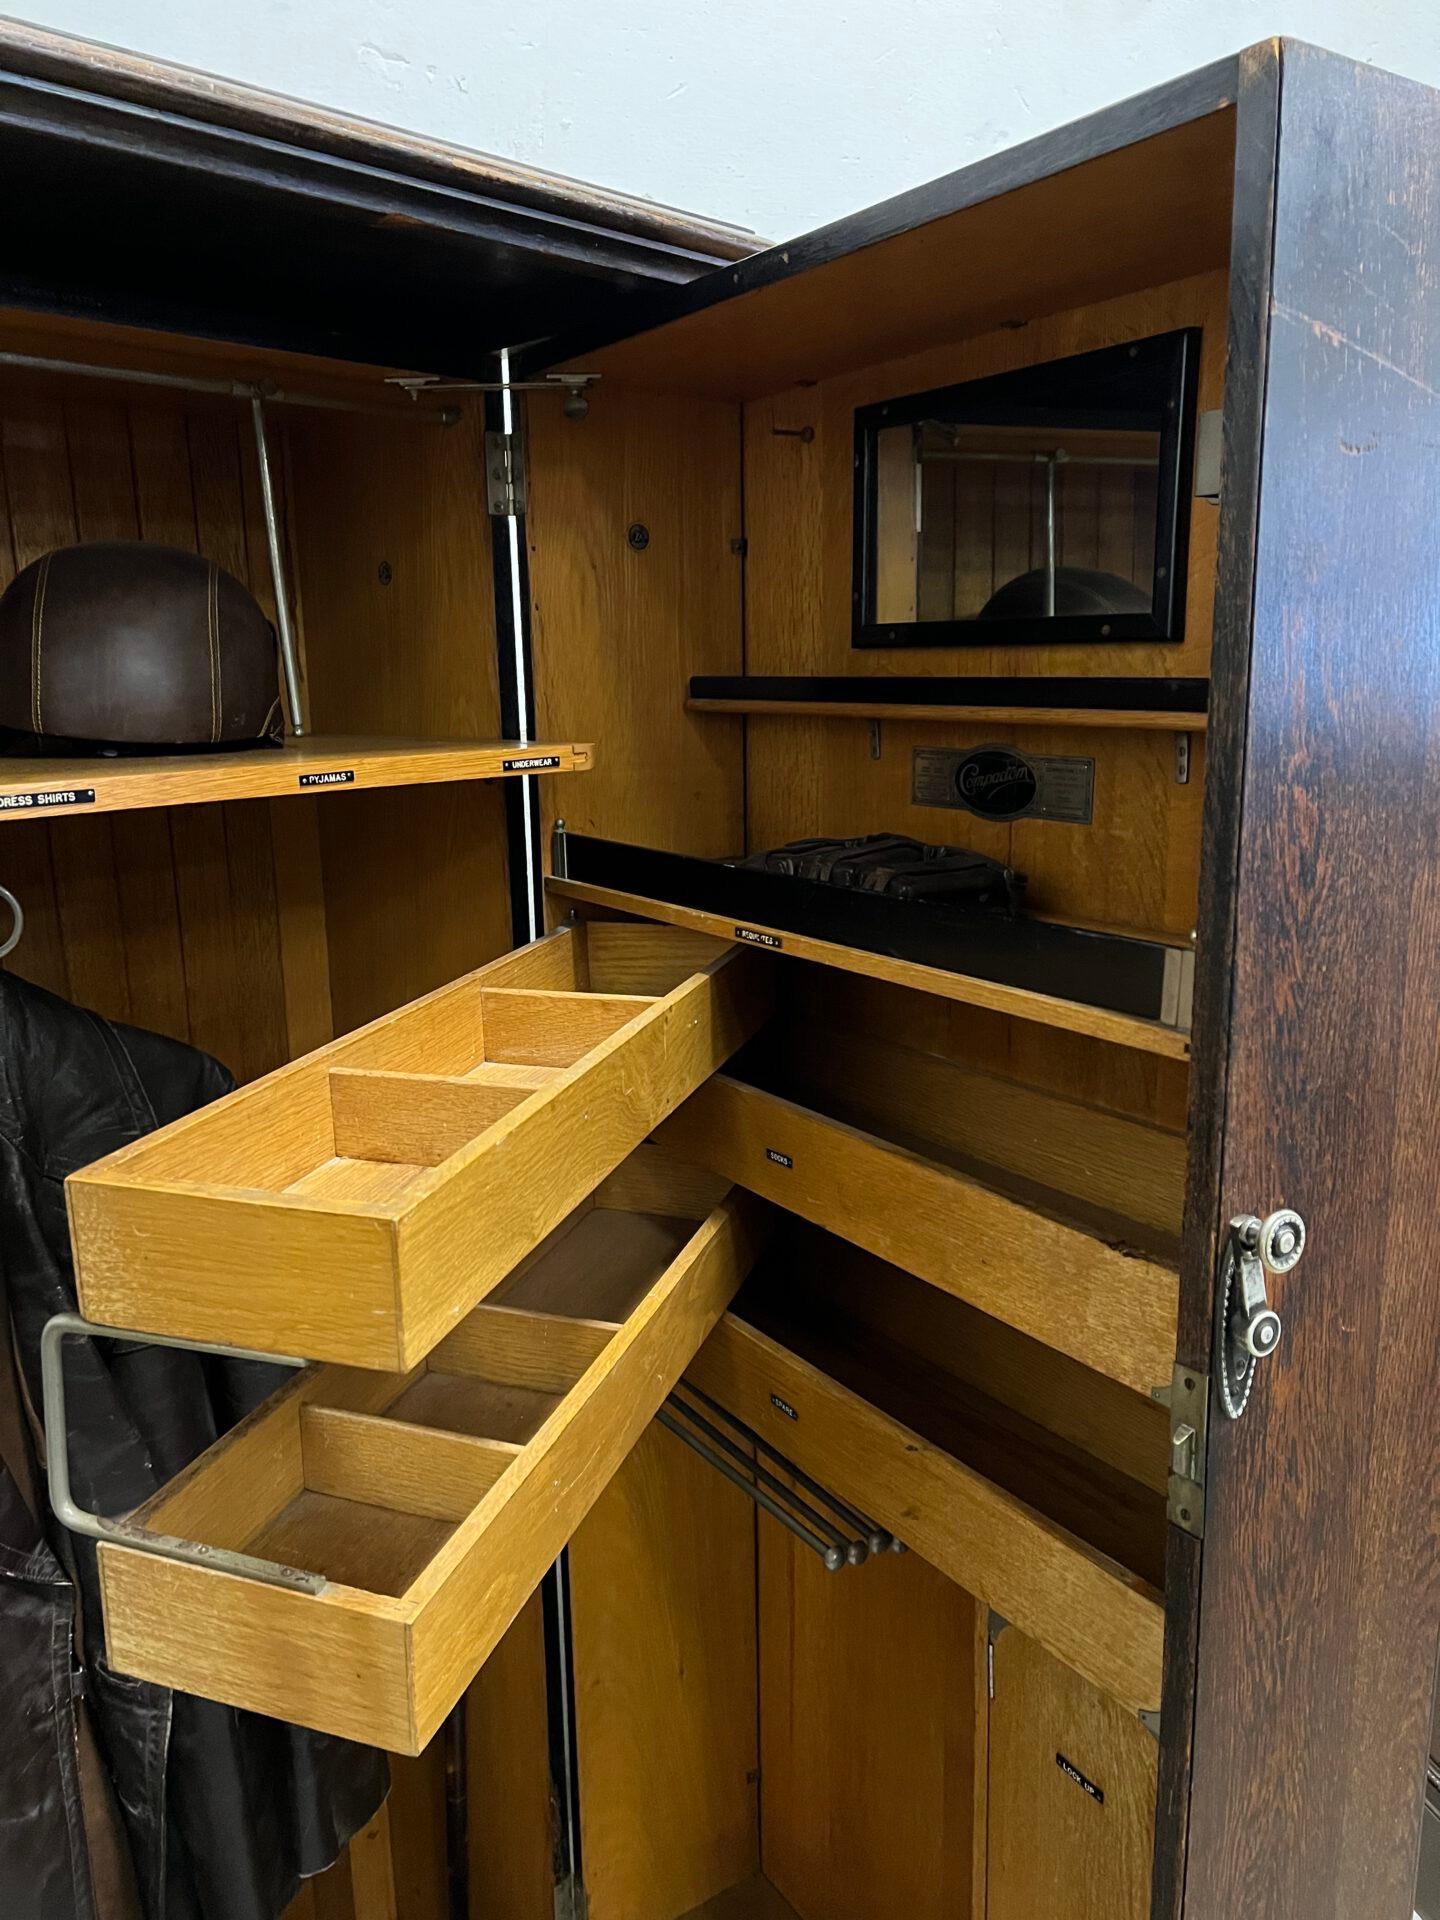 Rare cabinet made around 1910 by Compactom, based in London. Specialized in manufacturing refined furniture for the Gentleman. Also this great closet in which a man could store all his beautiful good and also take with him on a trip, for example, on